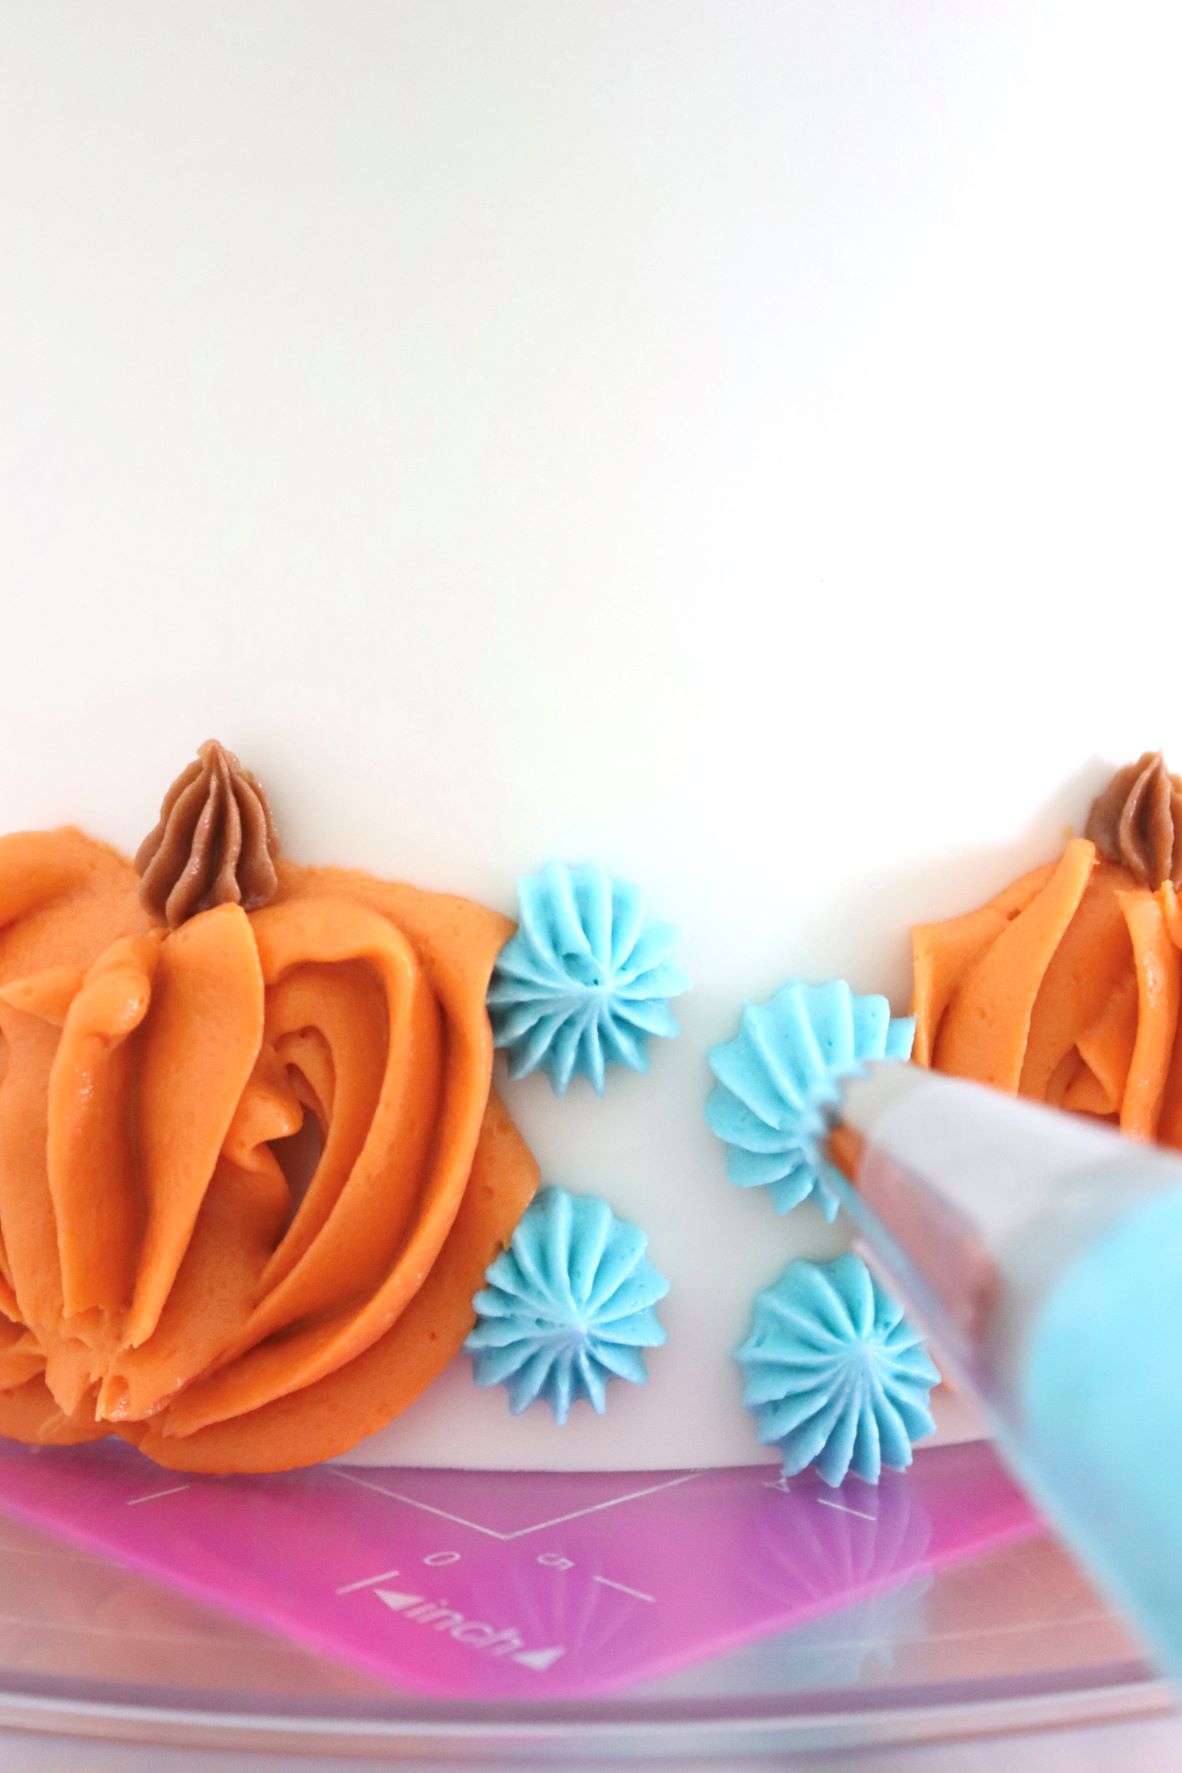 Pipe buttercream shapes